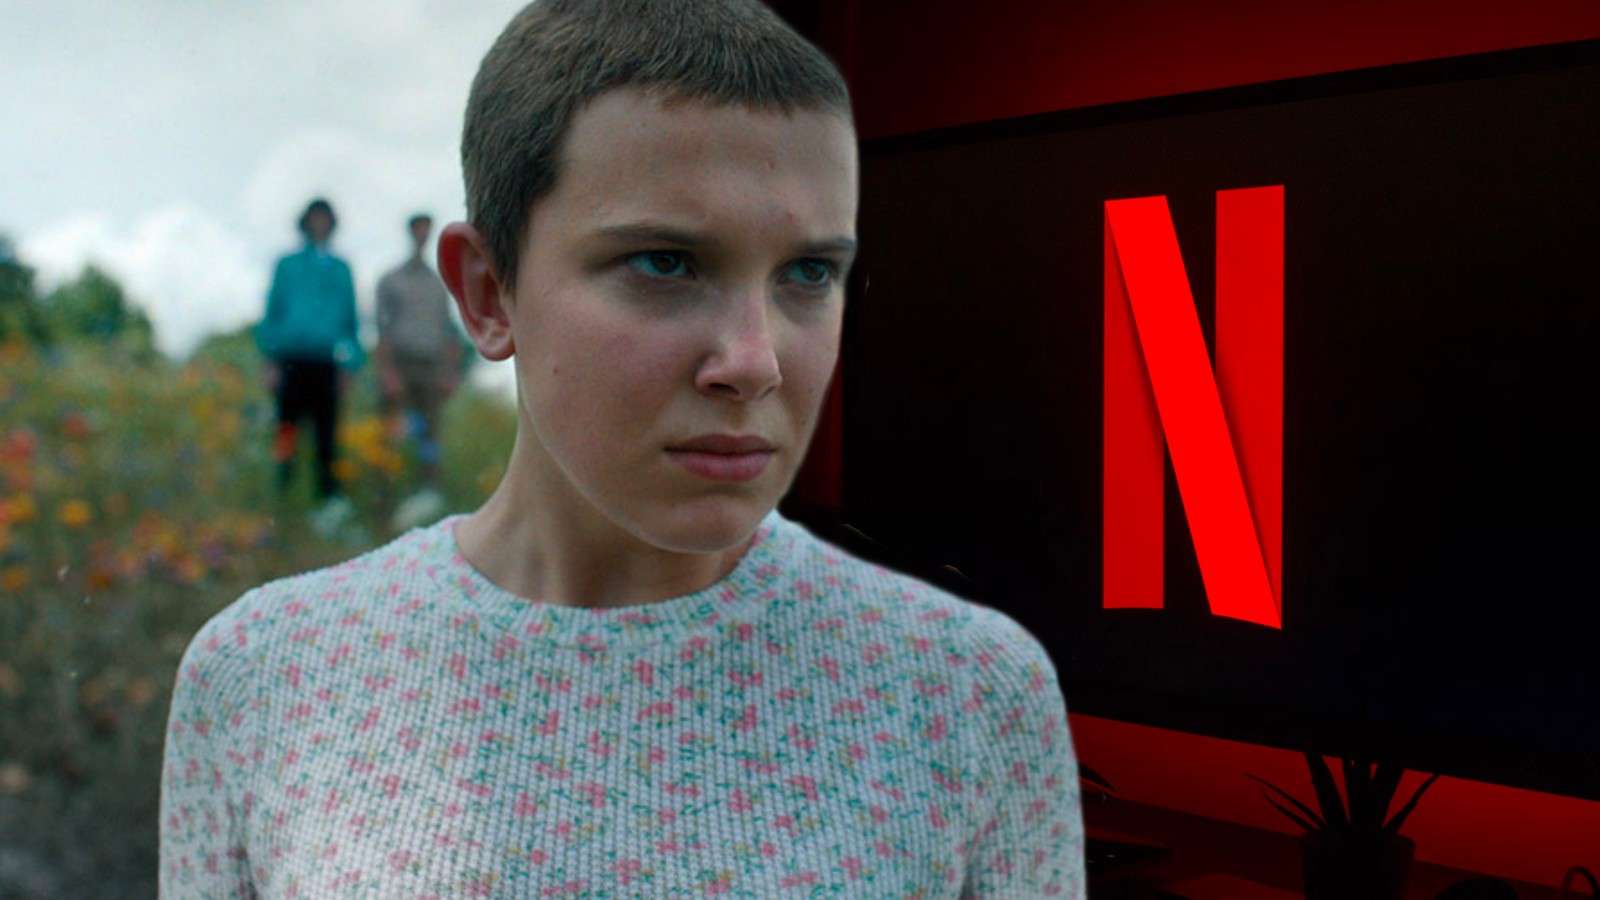 Eleven in Stranger Things and stock image of Netflix on TV